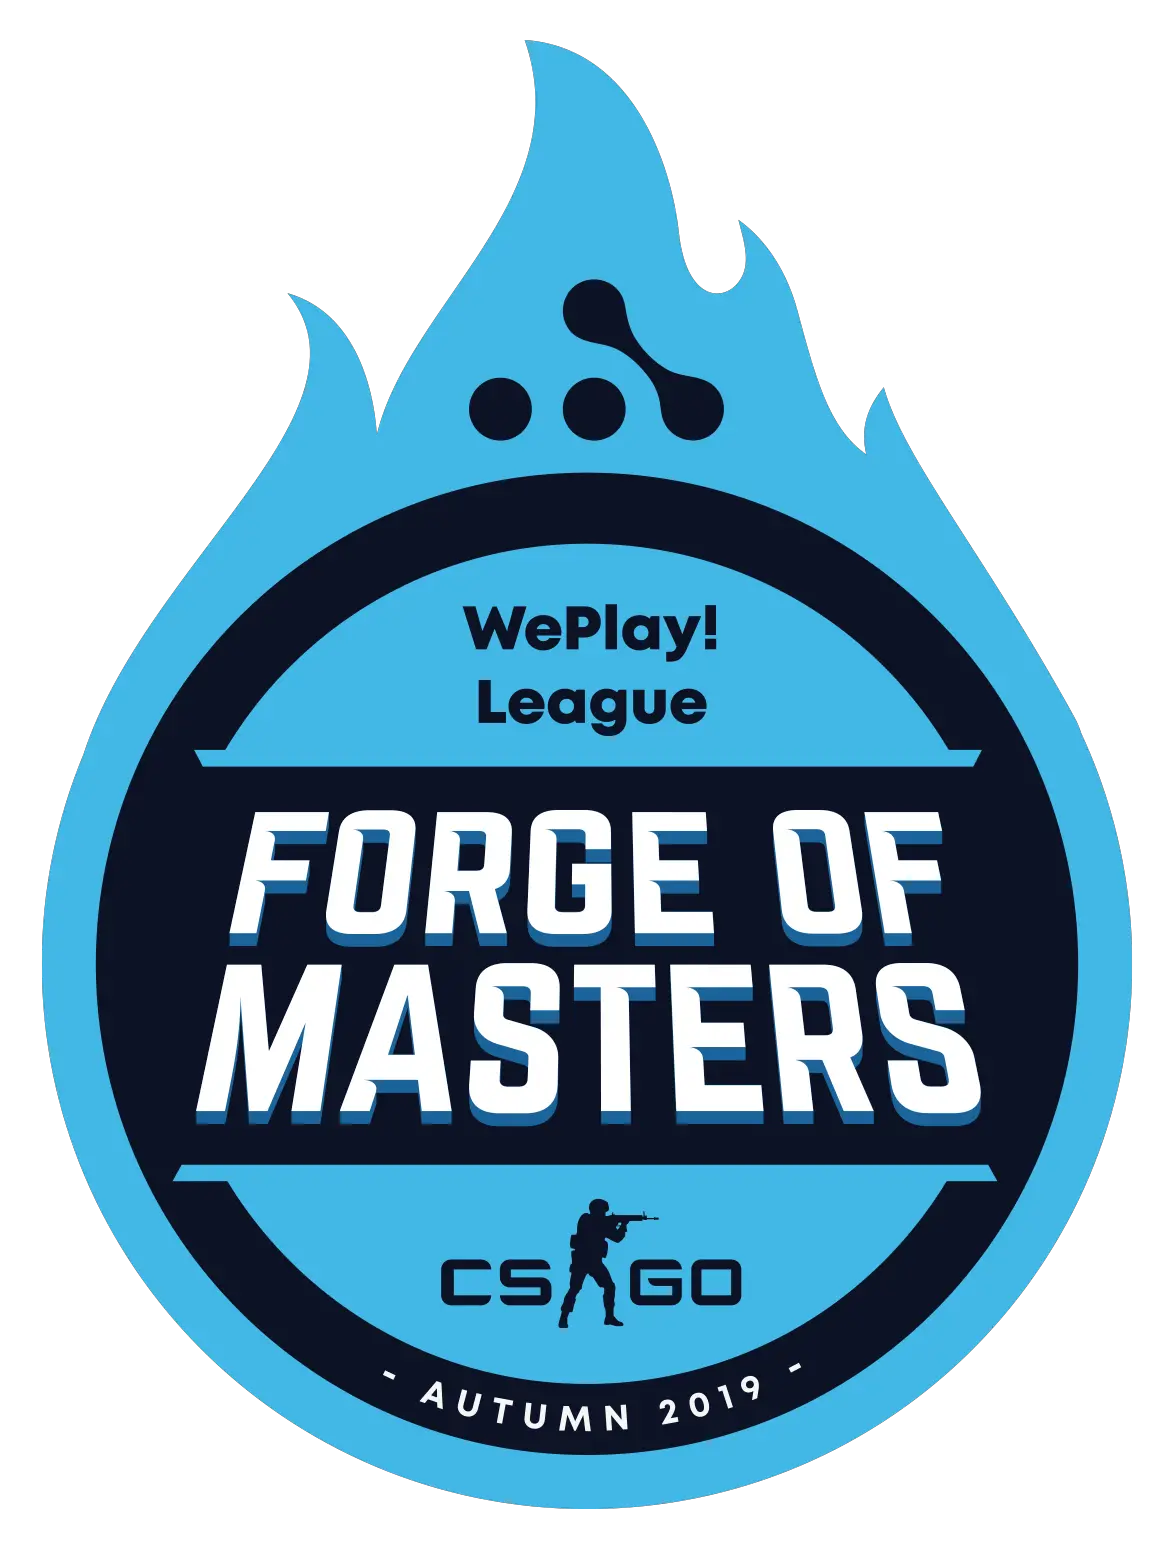 Weplay Forge Of Masters Season 2 Cis Open Qualifier Illustration Png Dame Tu Cosita Png